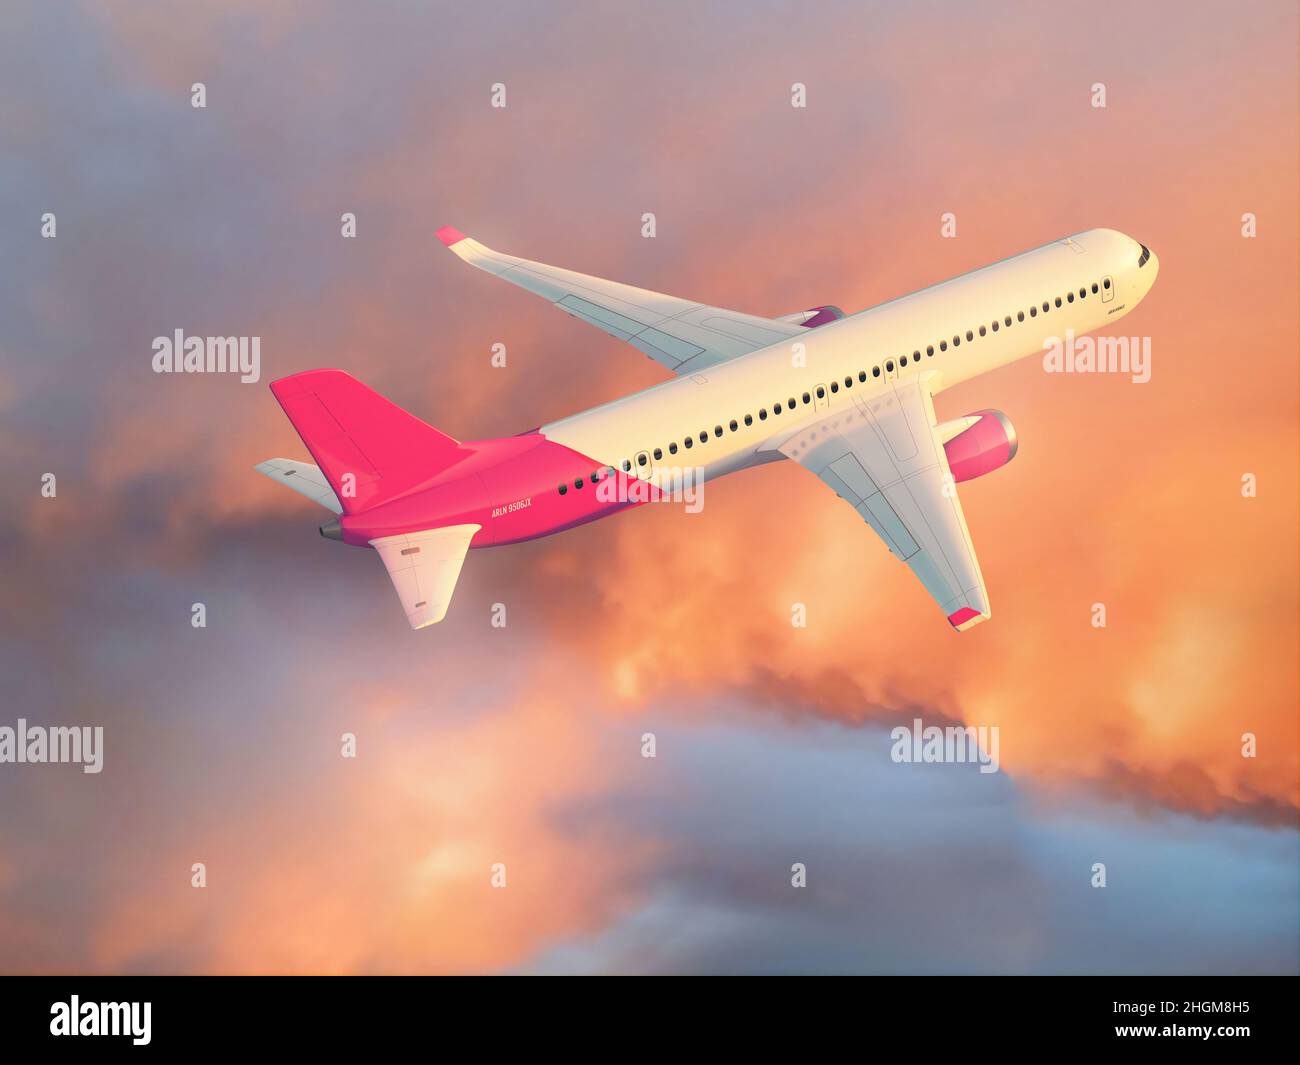 Aeroplane flying above pink clouds, illustration Stock Photo